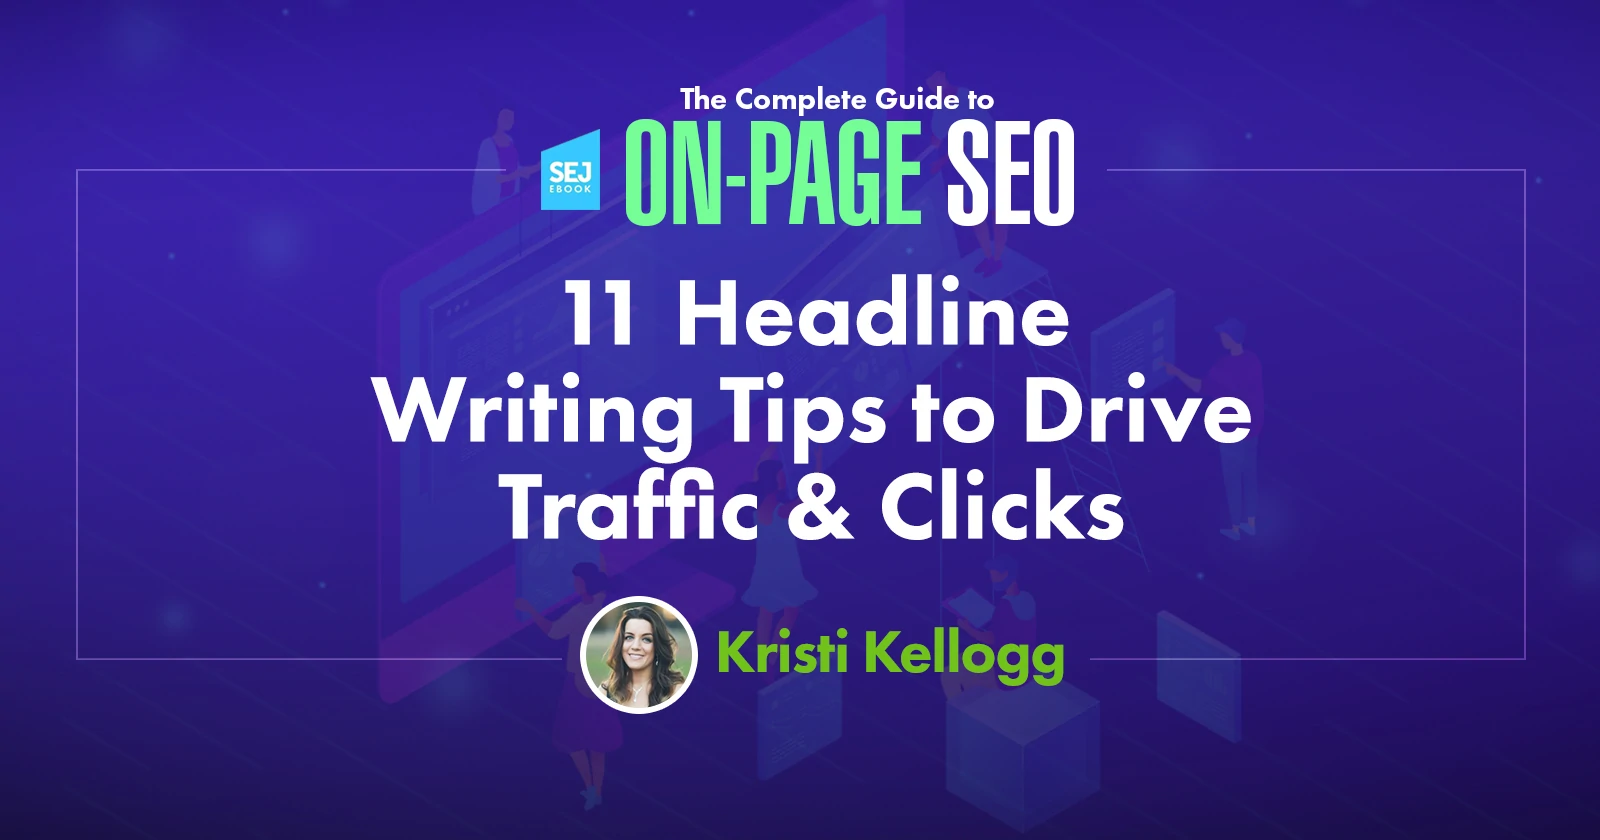 To Drive Traffic and Clicks 11 Headline Tips